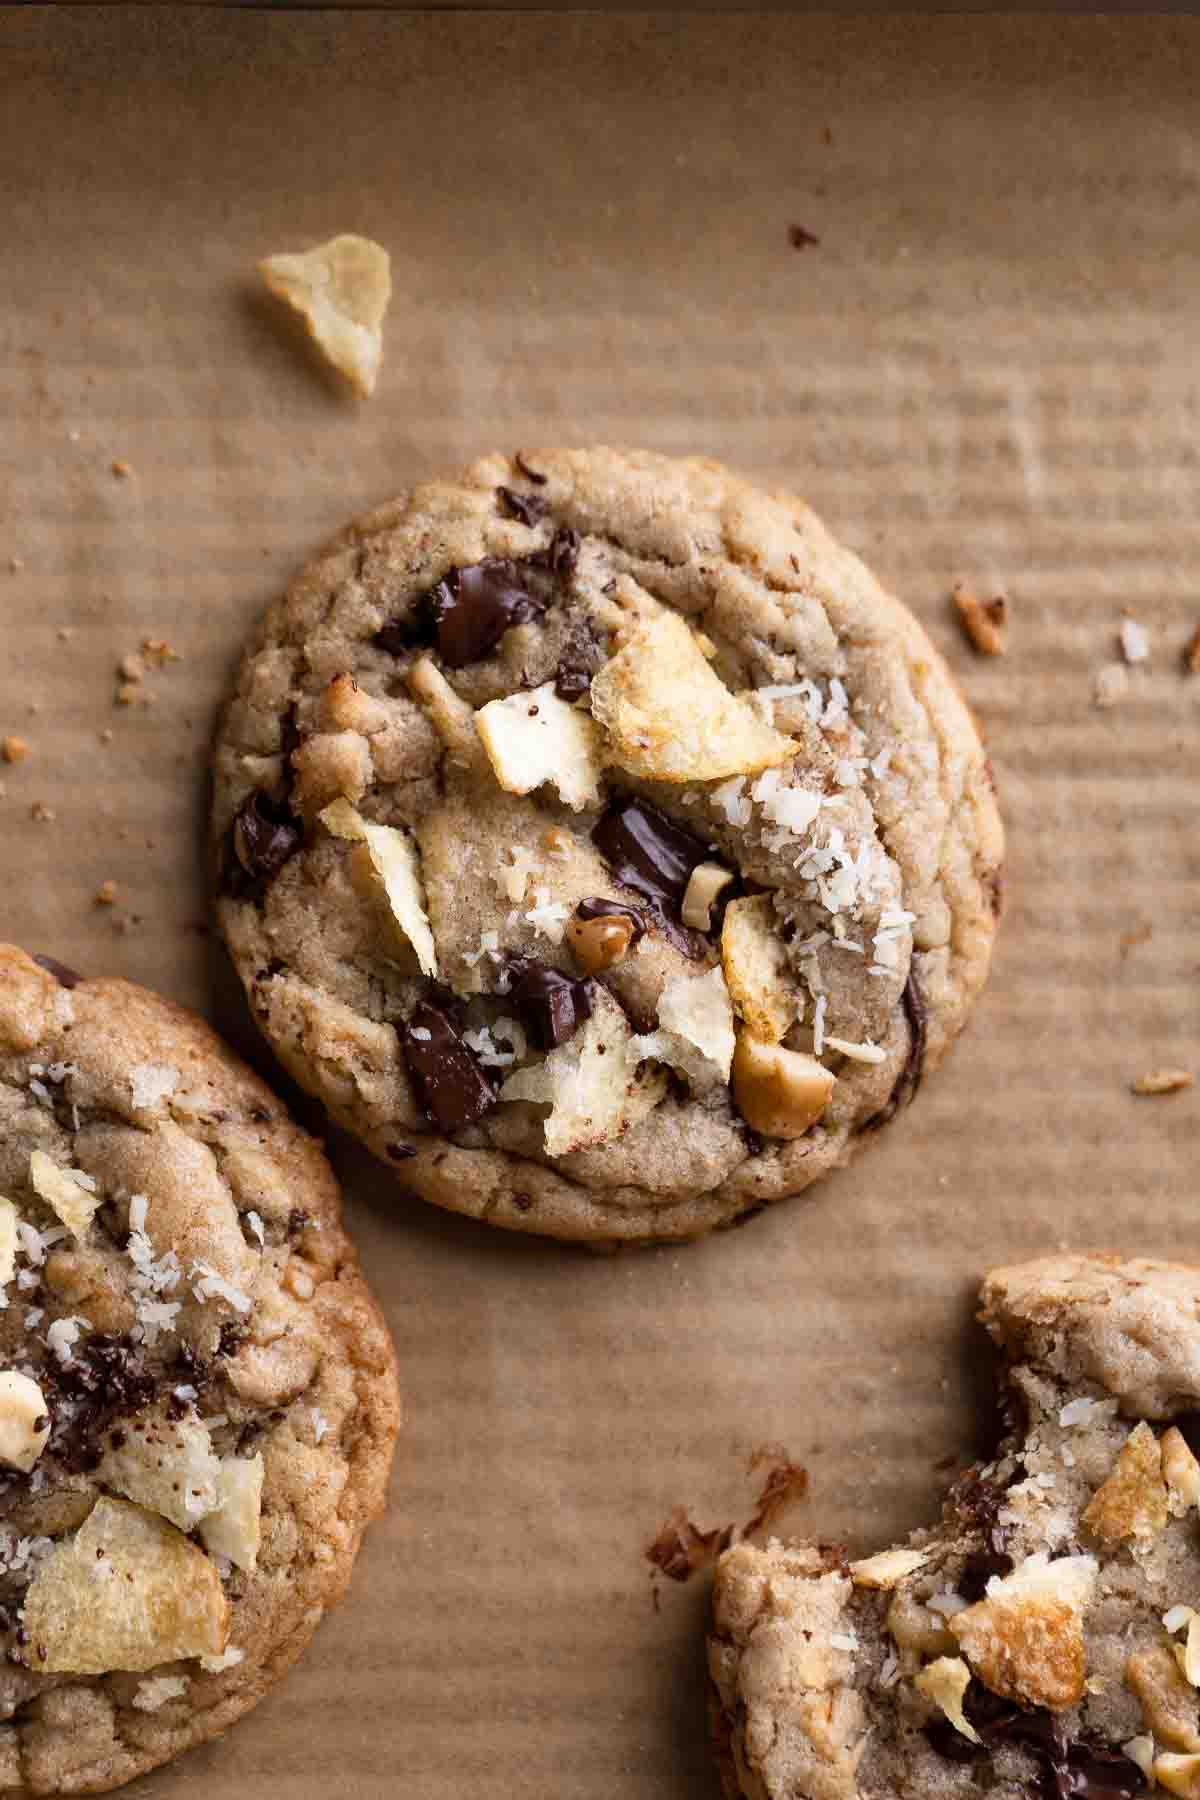 a million dollar cookie topped with extra chocolate, walnuts, and chips.